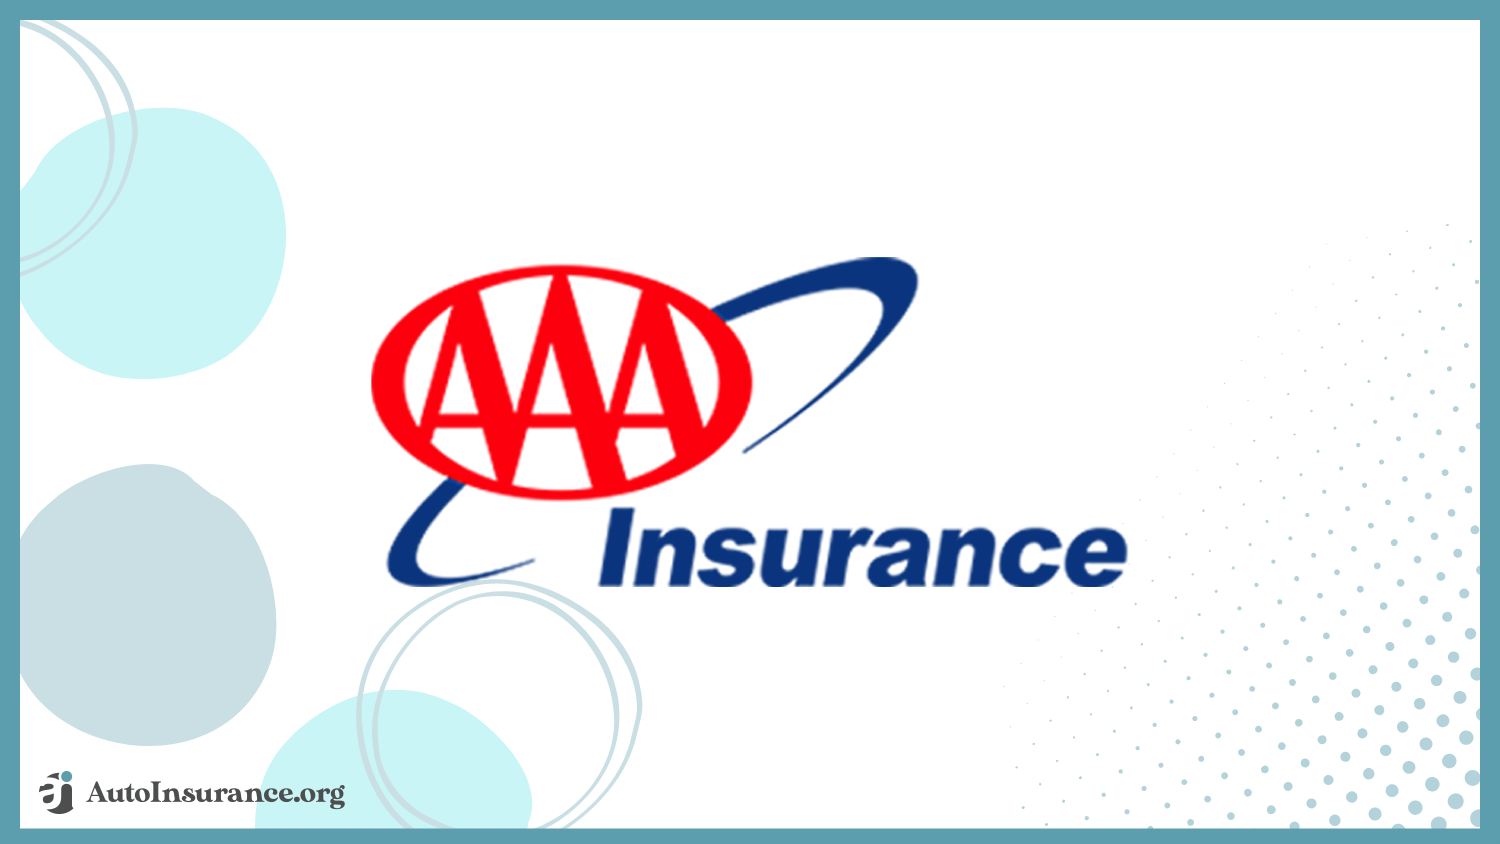 AAA: Best Windshield Replacement Coverage in Texas